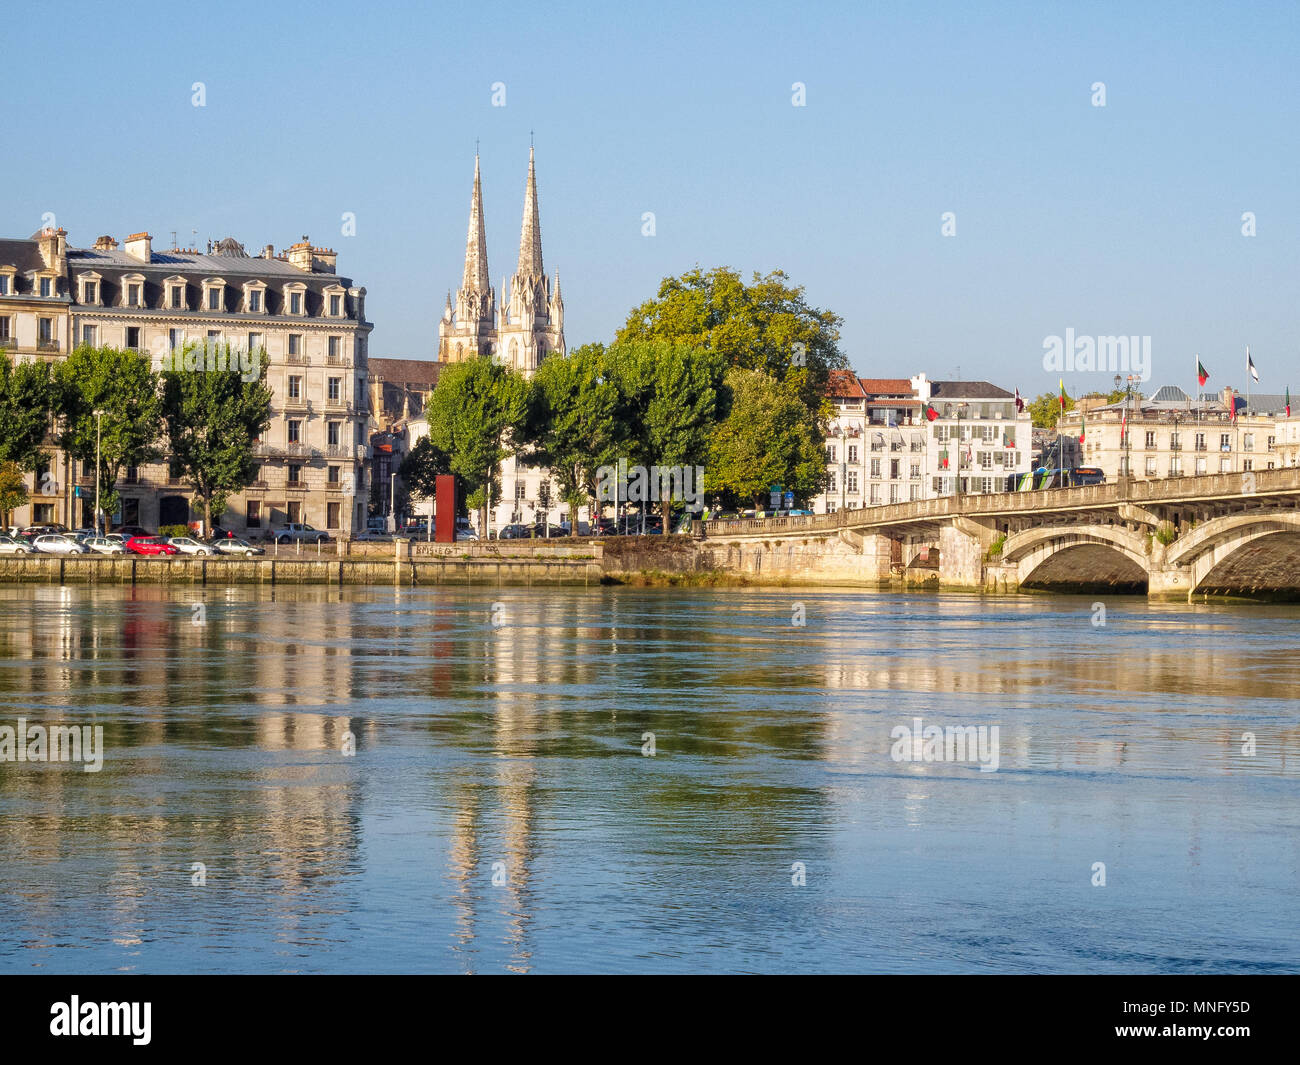 Adour River and the spires of the Cathedral of Saint Mary - Bayonne, France Stock Photo